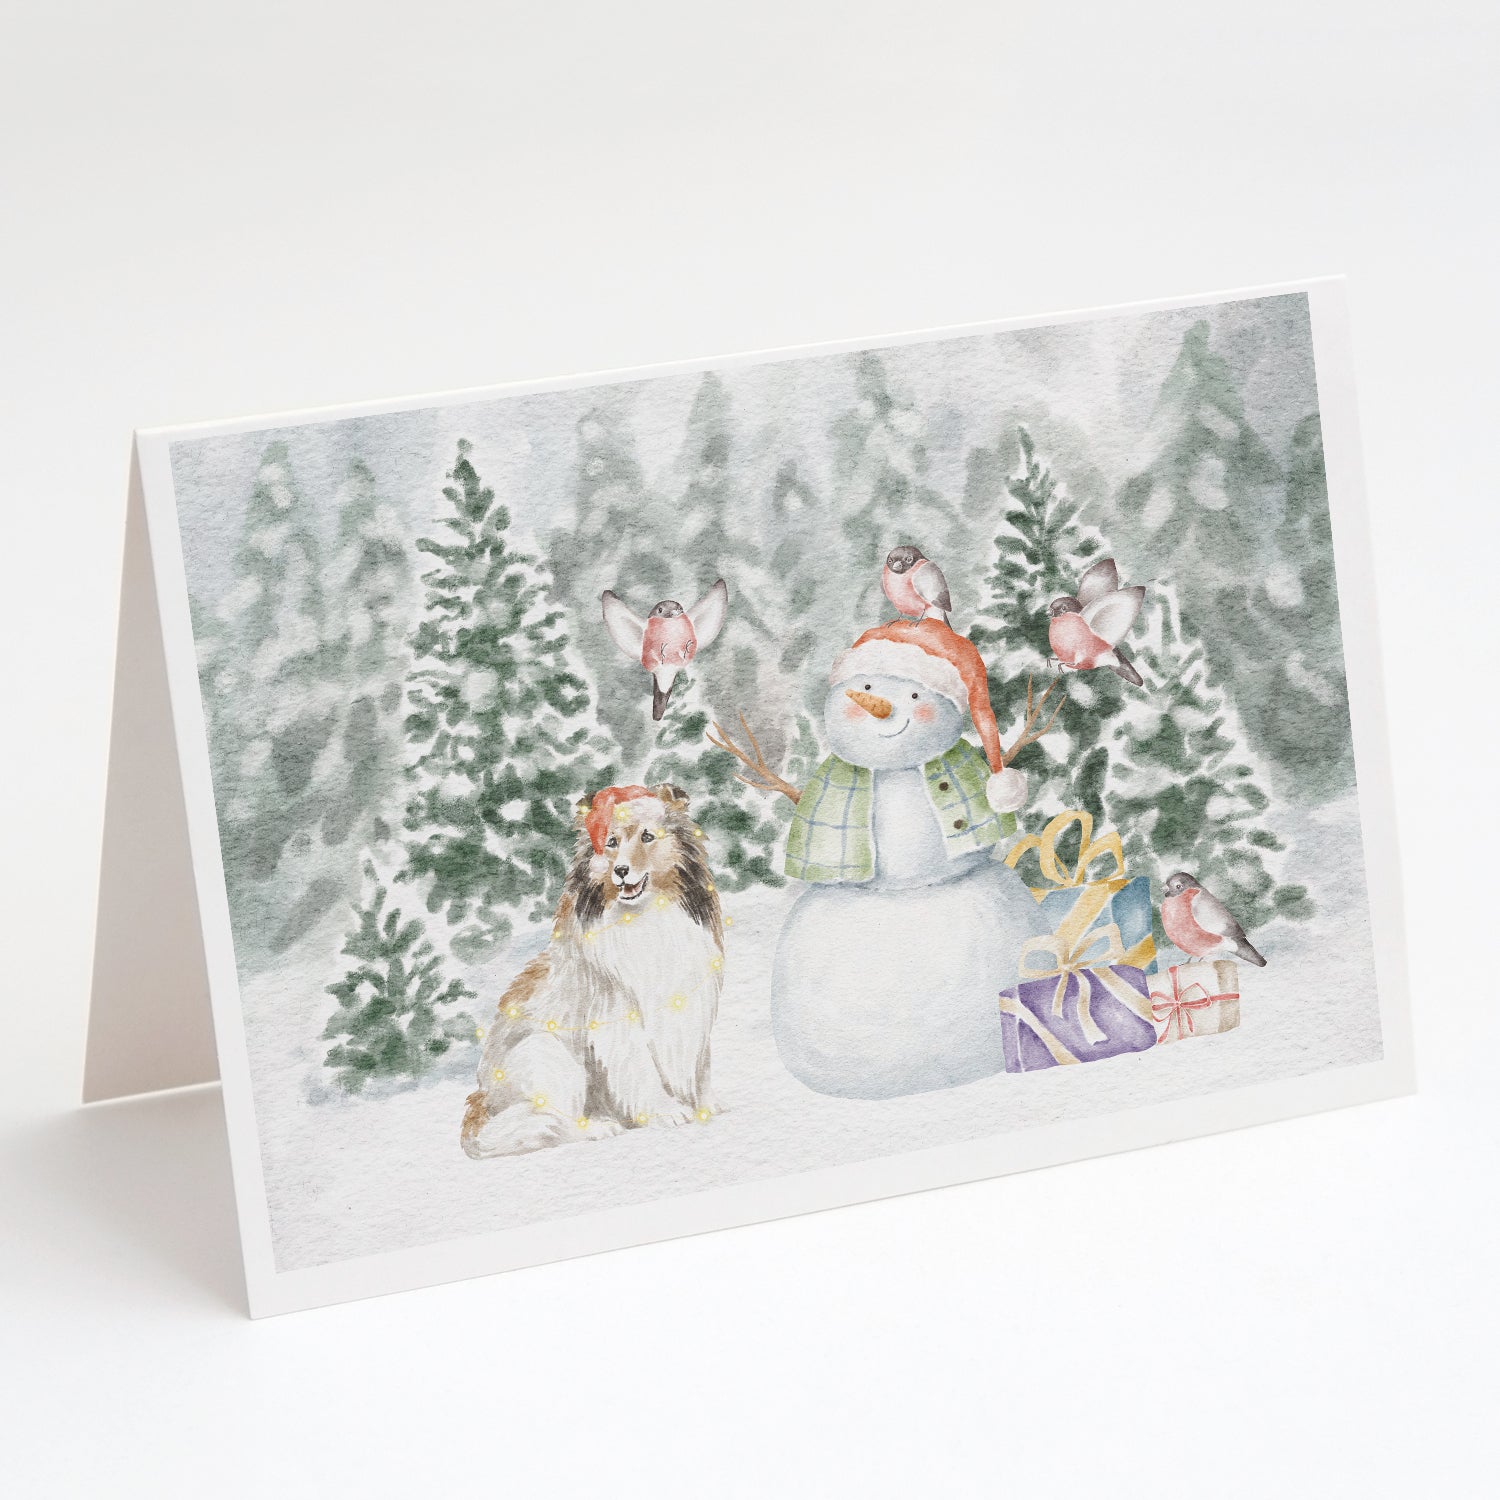 Buy this Sheltie/Shetland Sheepdog Sable with Christmas Presents Greeting Cards and Envelopes Pack of 8